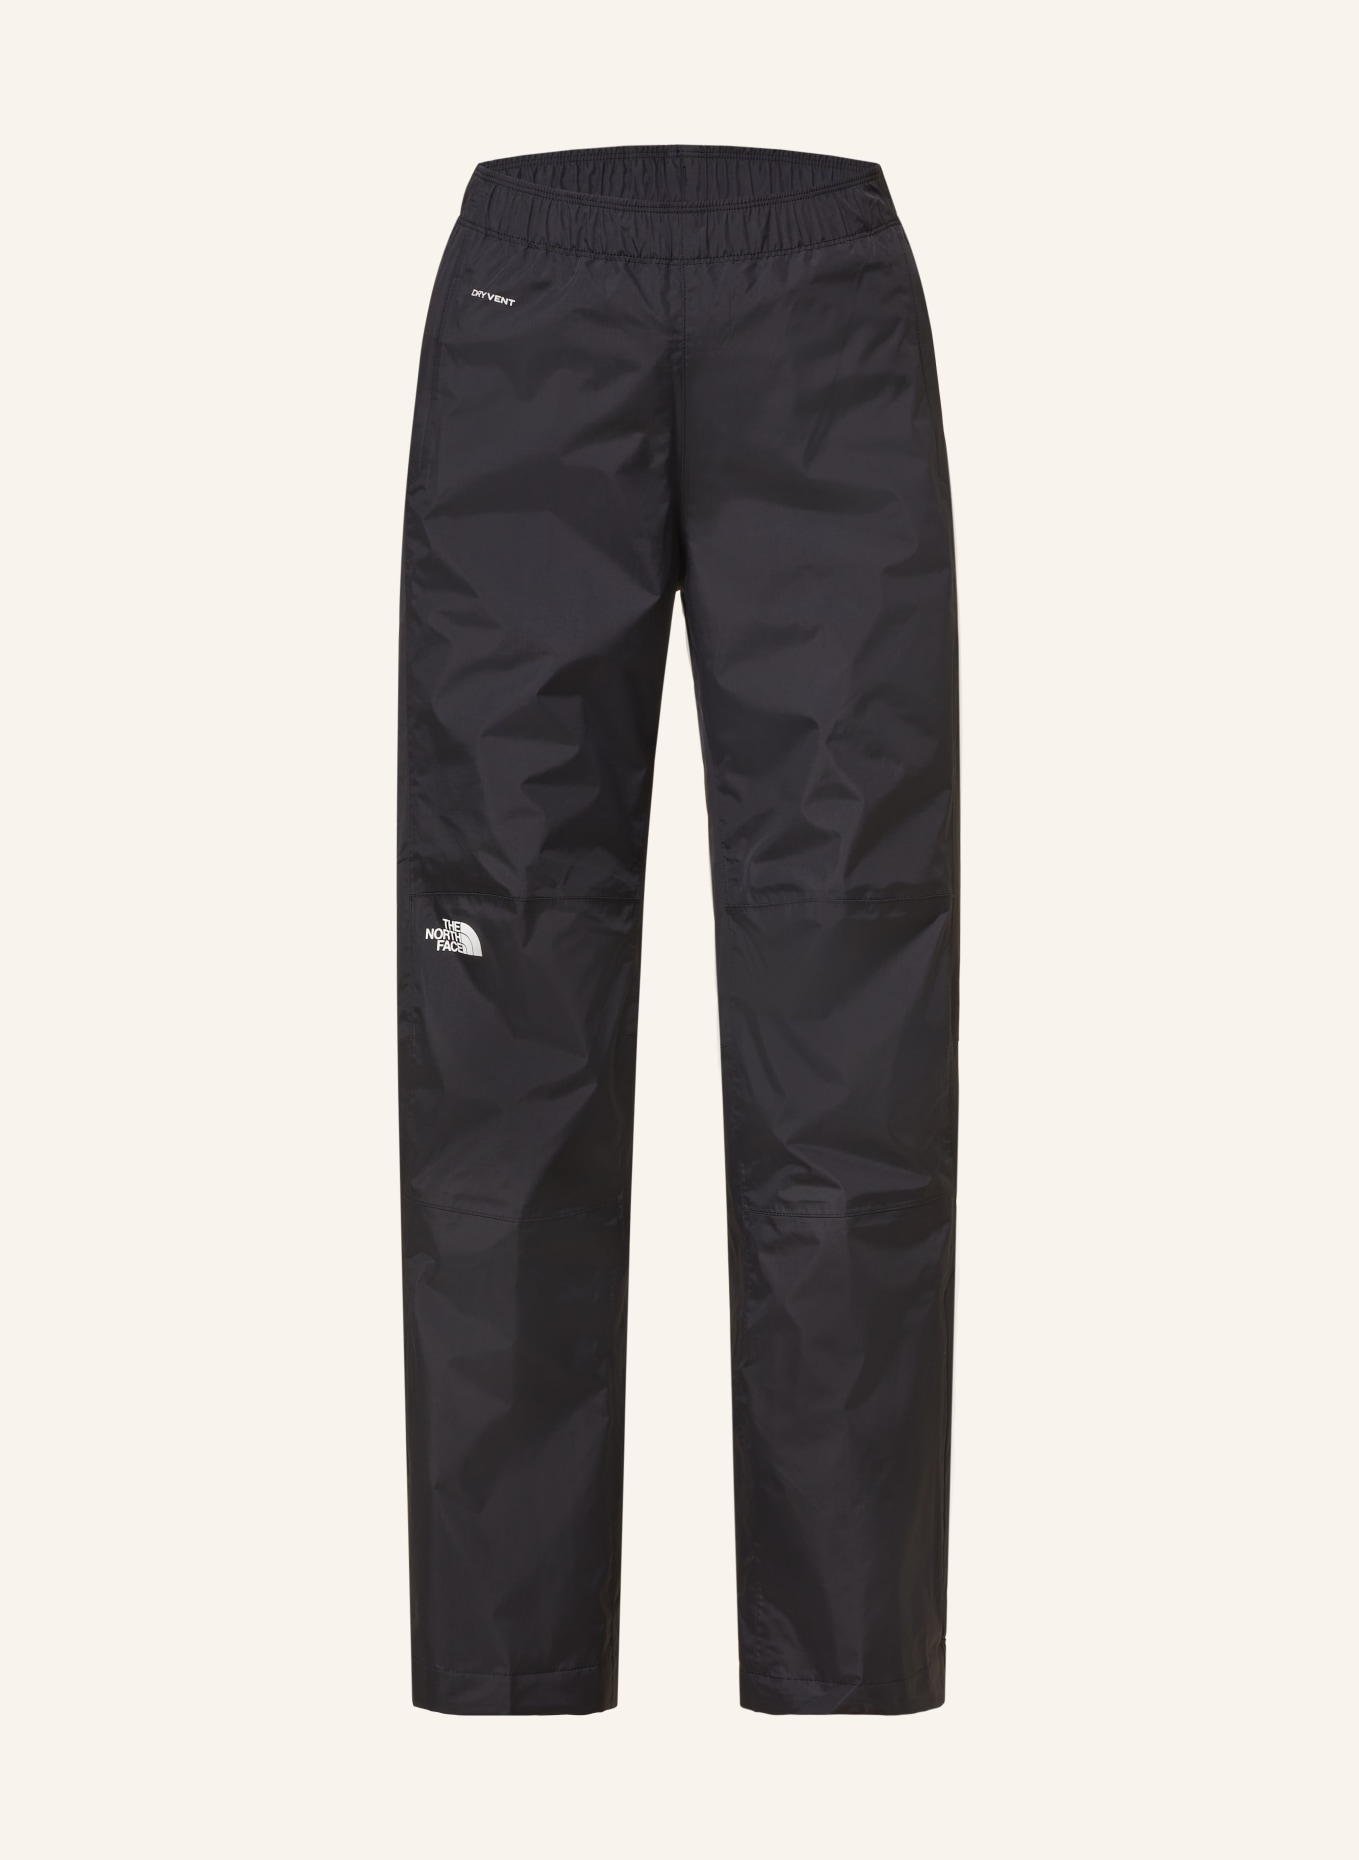 Women's Brodalen Zip-Off Hiking Pants Willow Gray | Buy Women's Brodalen  Zip-Off Hiking Pants Willow Gray here | Outnorth